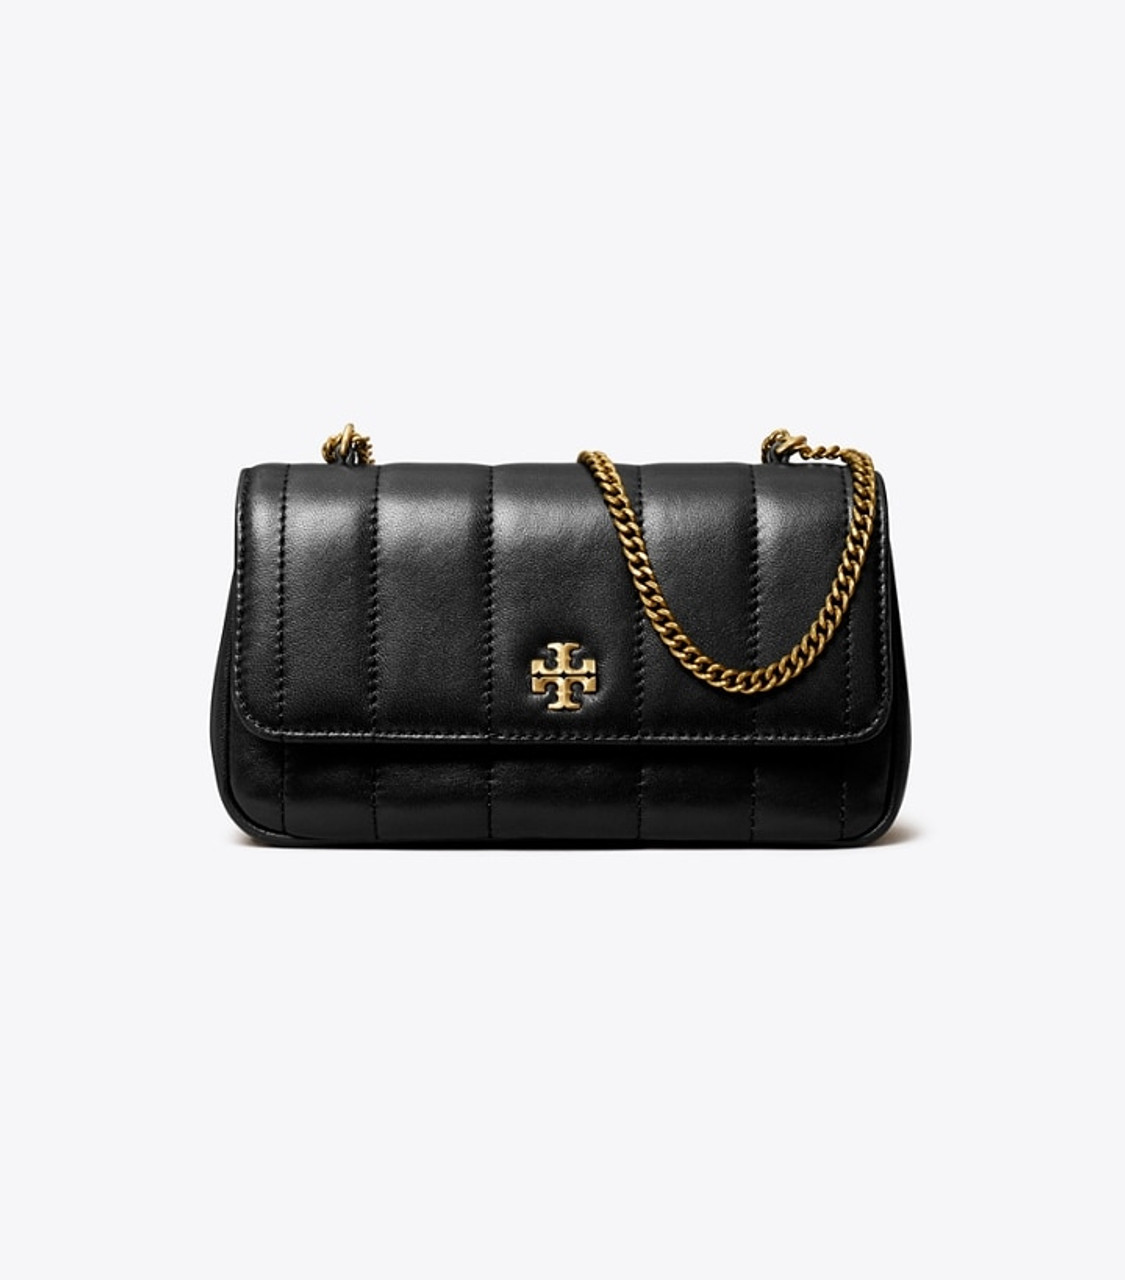 Tory Burch - Kira Small - Dark beige quilted bag in patinated